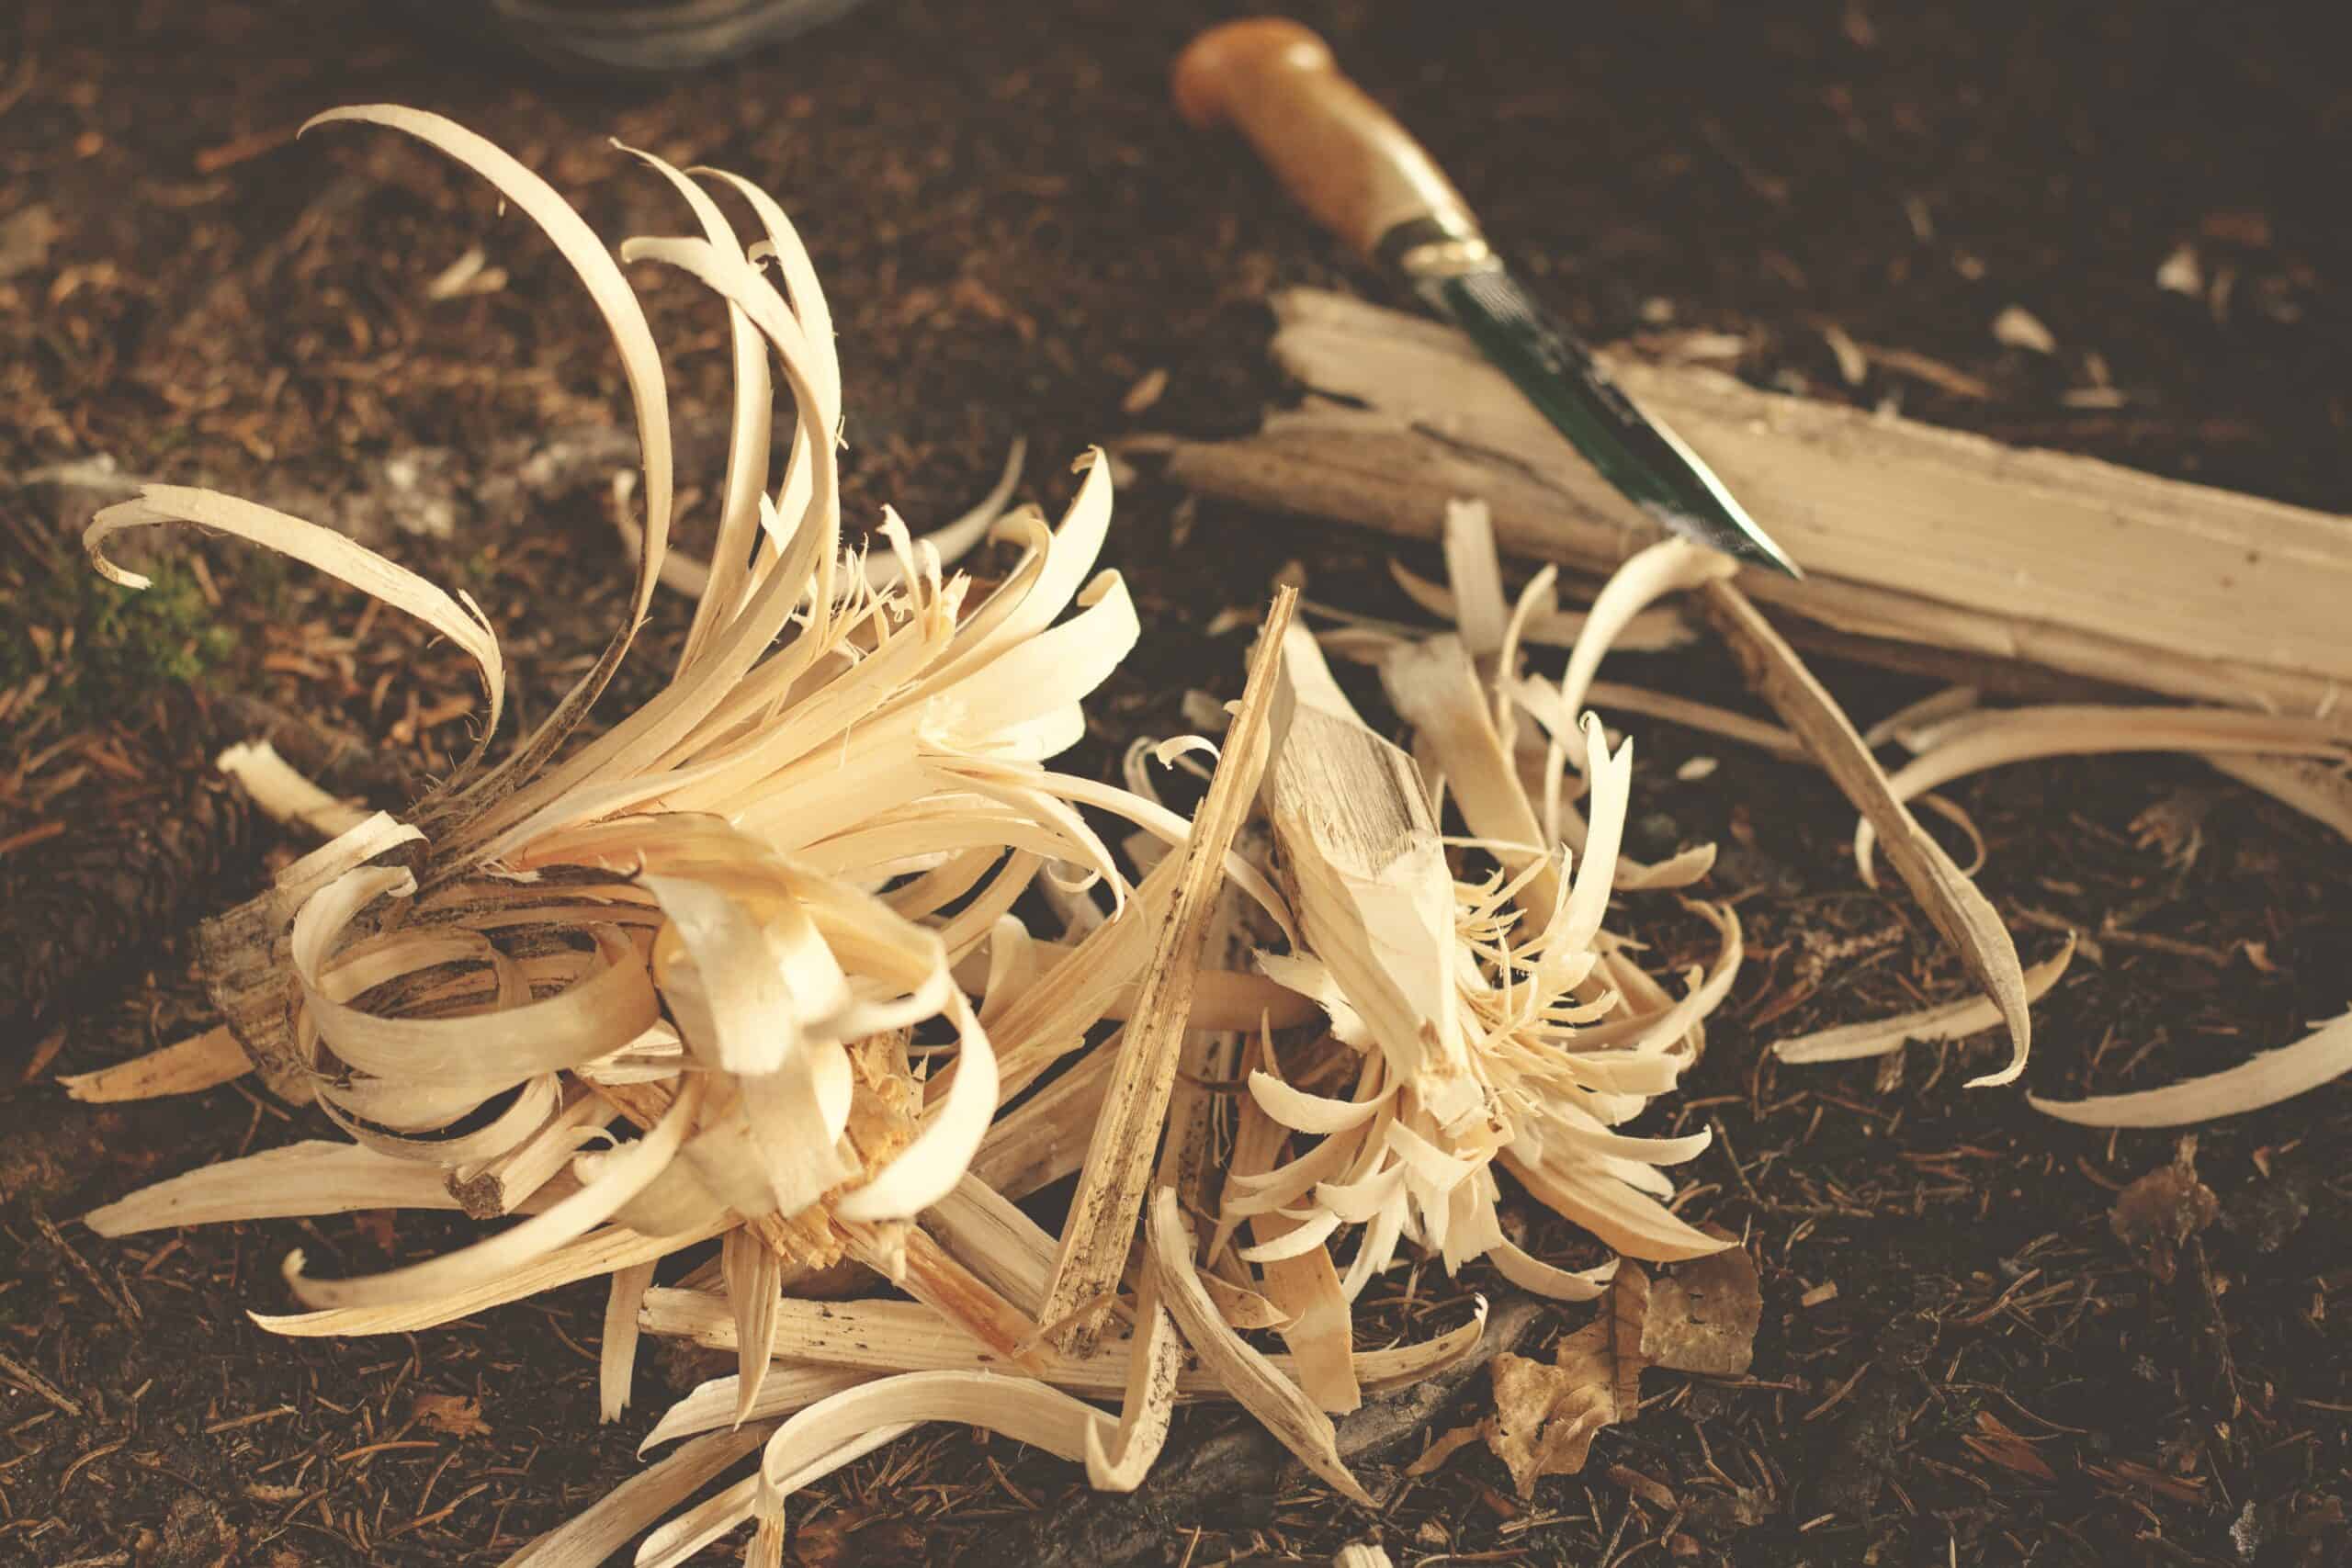 wood chips and tools